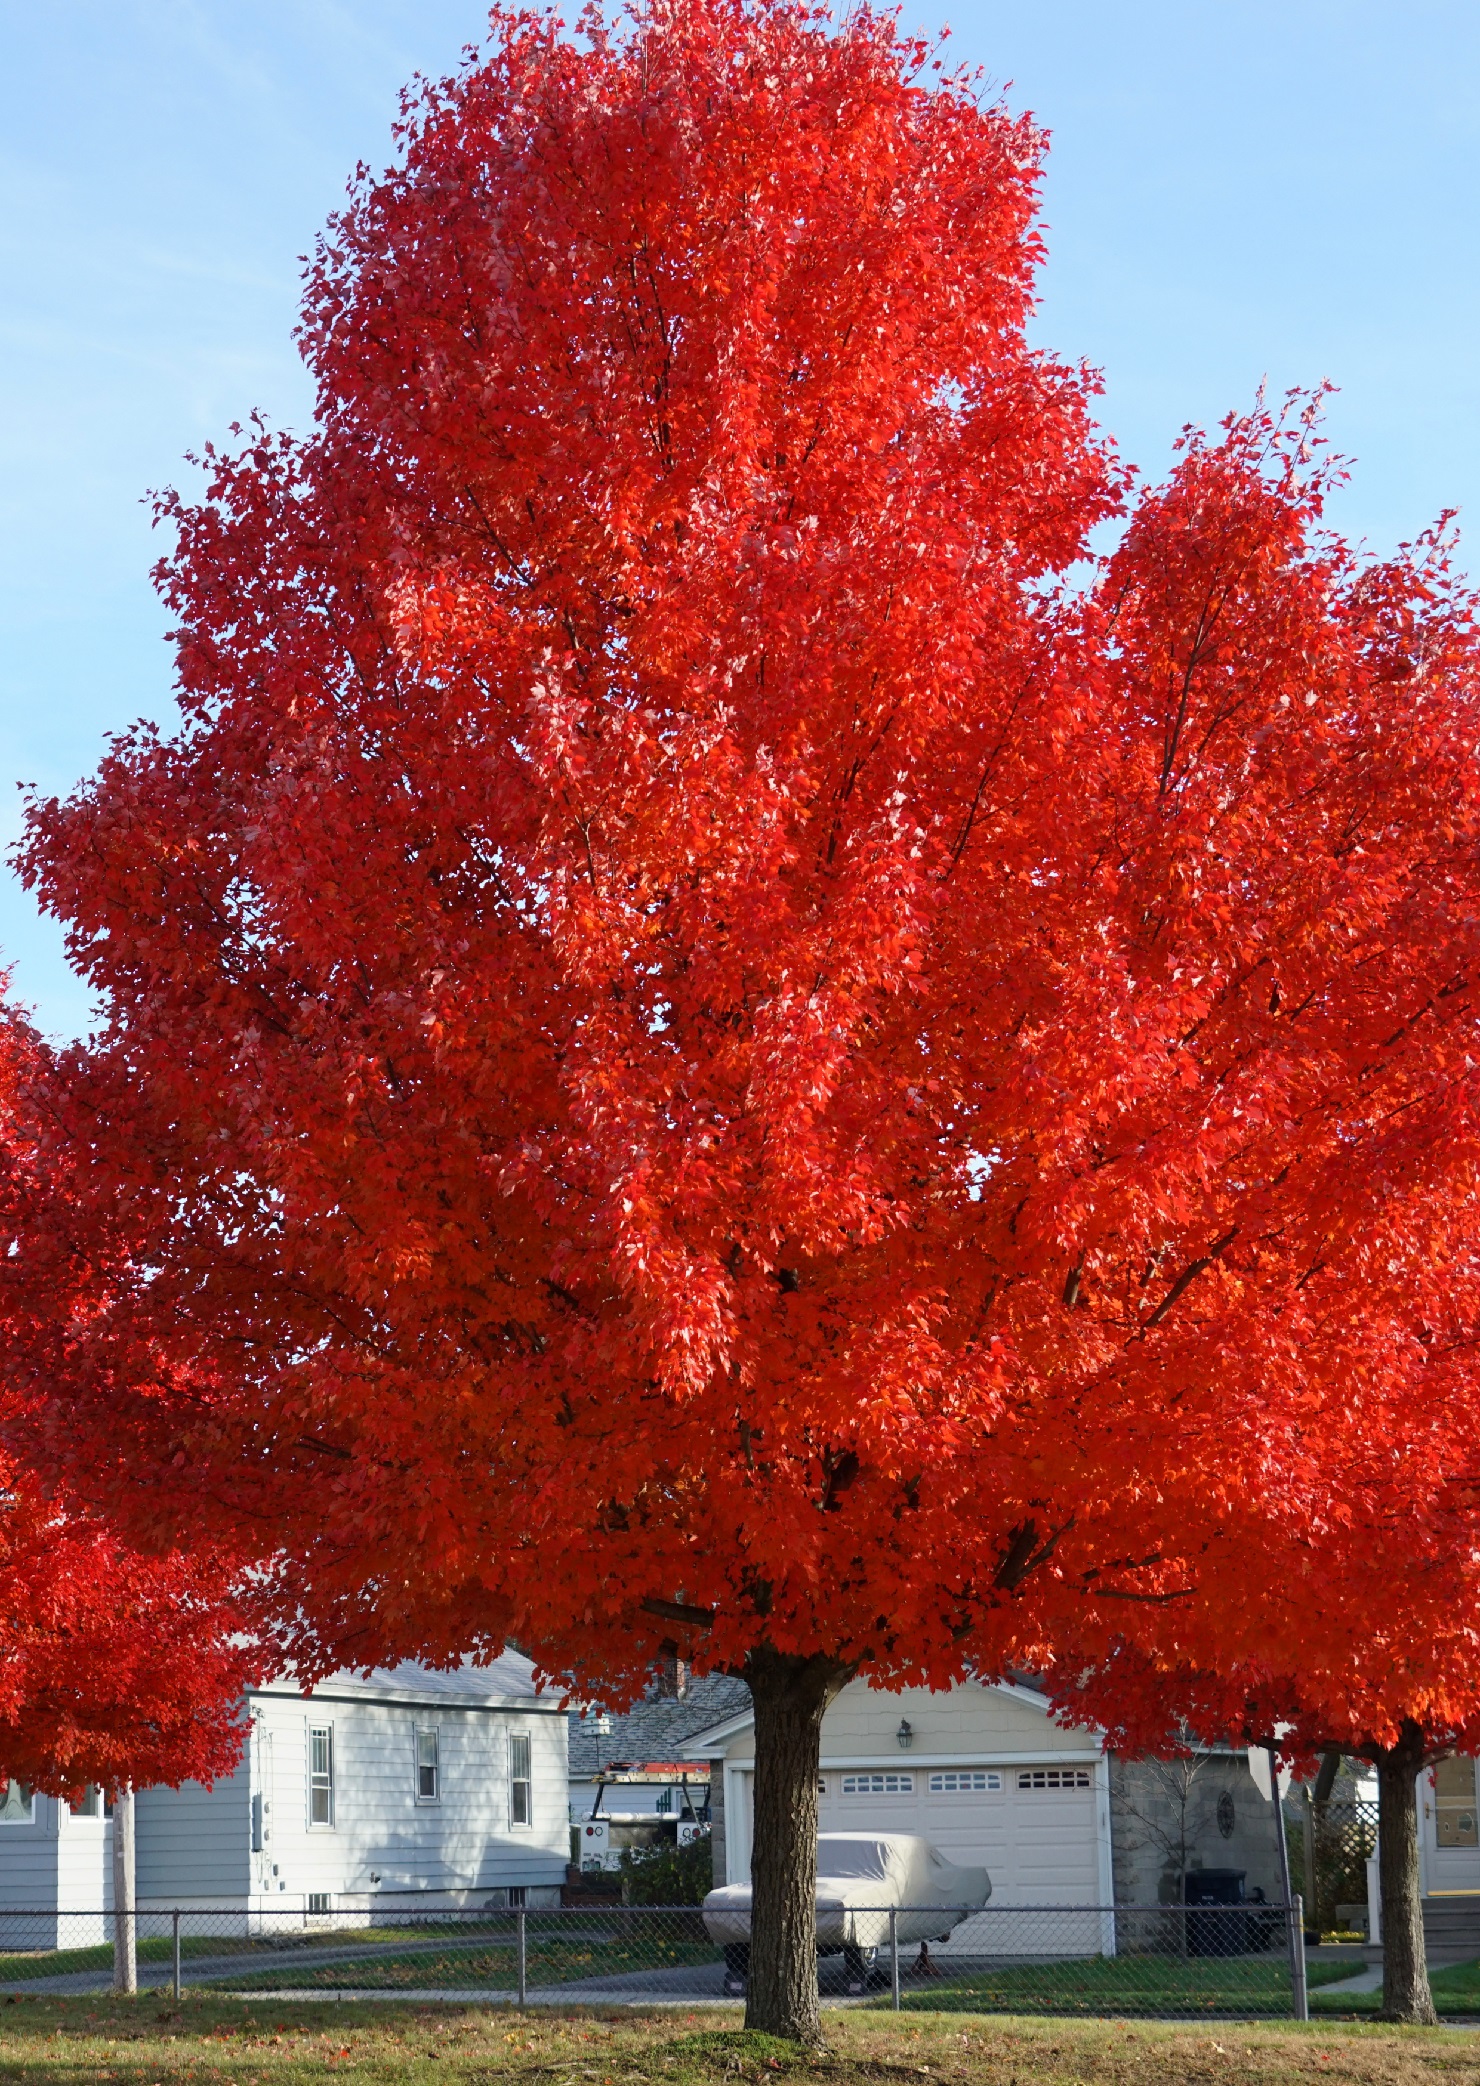 Red Maple Trees Archives - Ison's Nursery & Vineyard